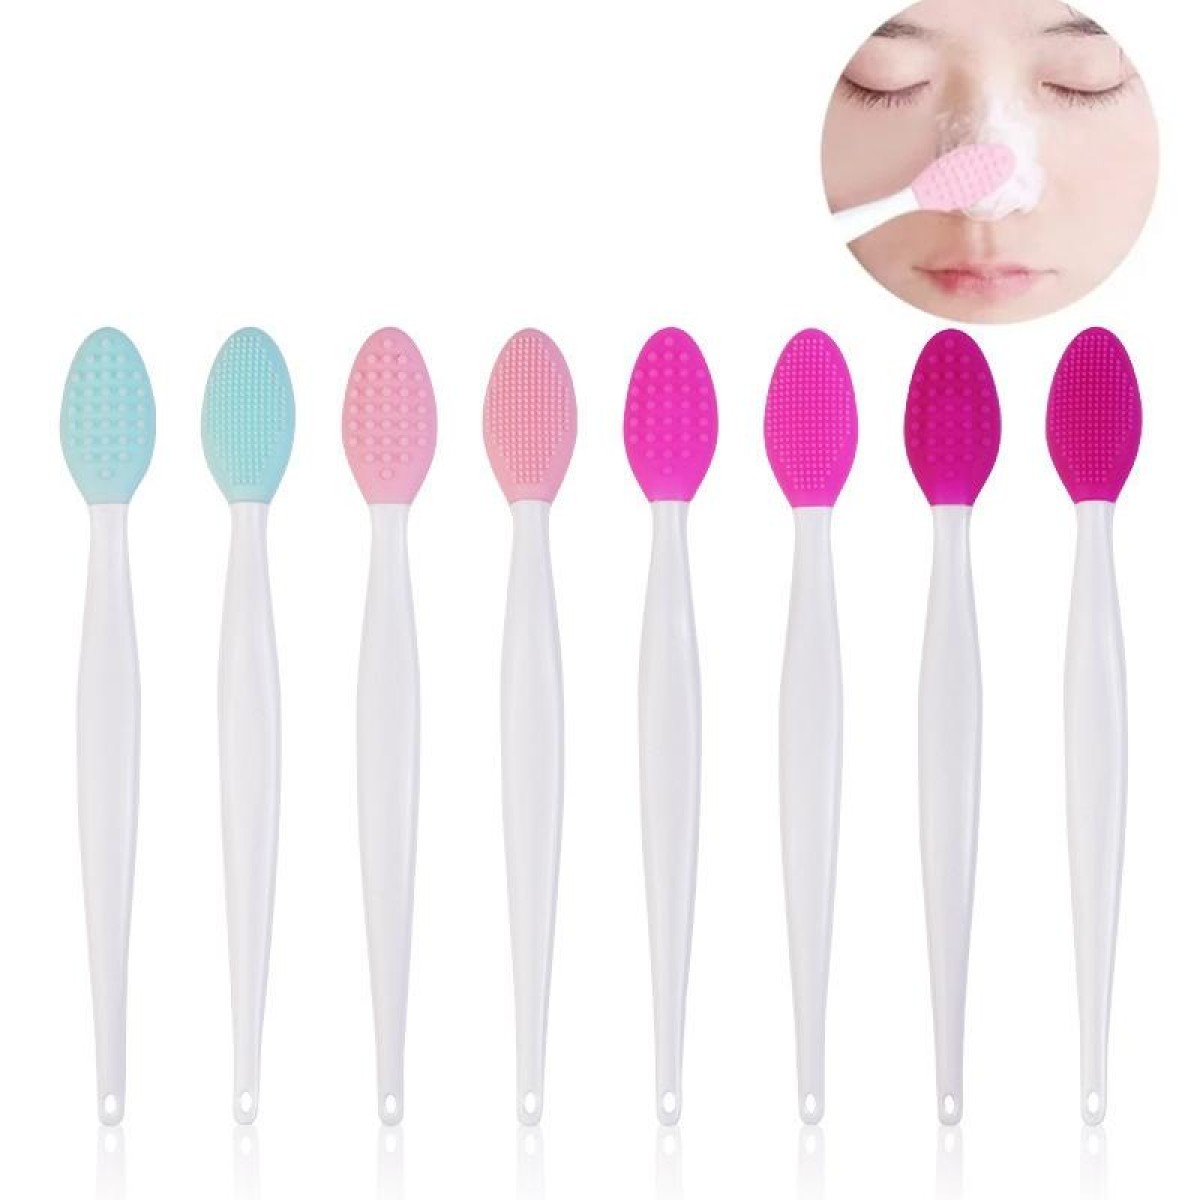 Silicone Cleaning Brush Beauty Tool Double Side Nose To Clean Blackhead Removers(Color Random Delivery)